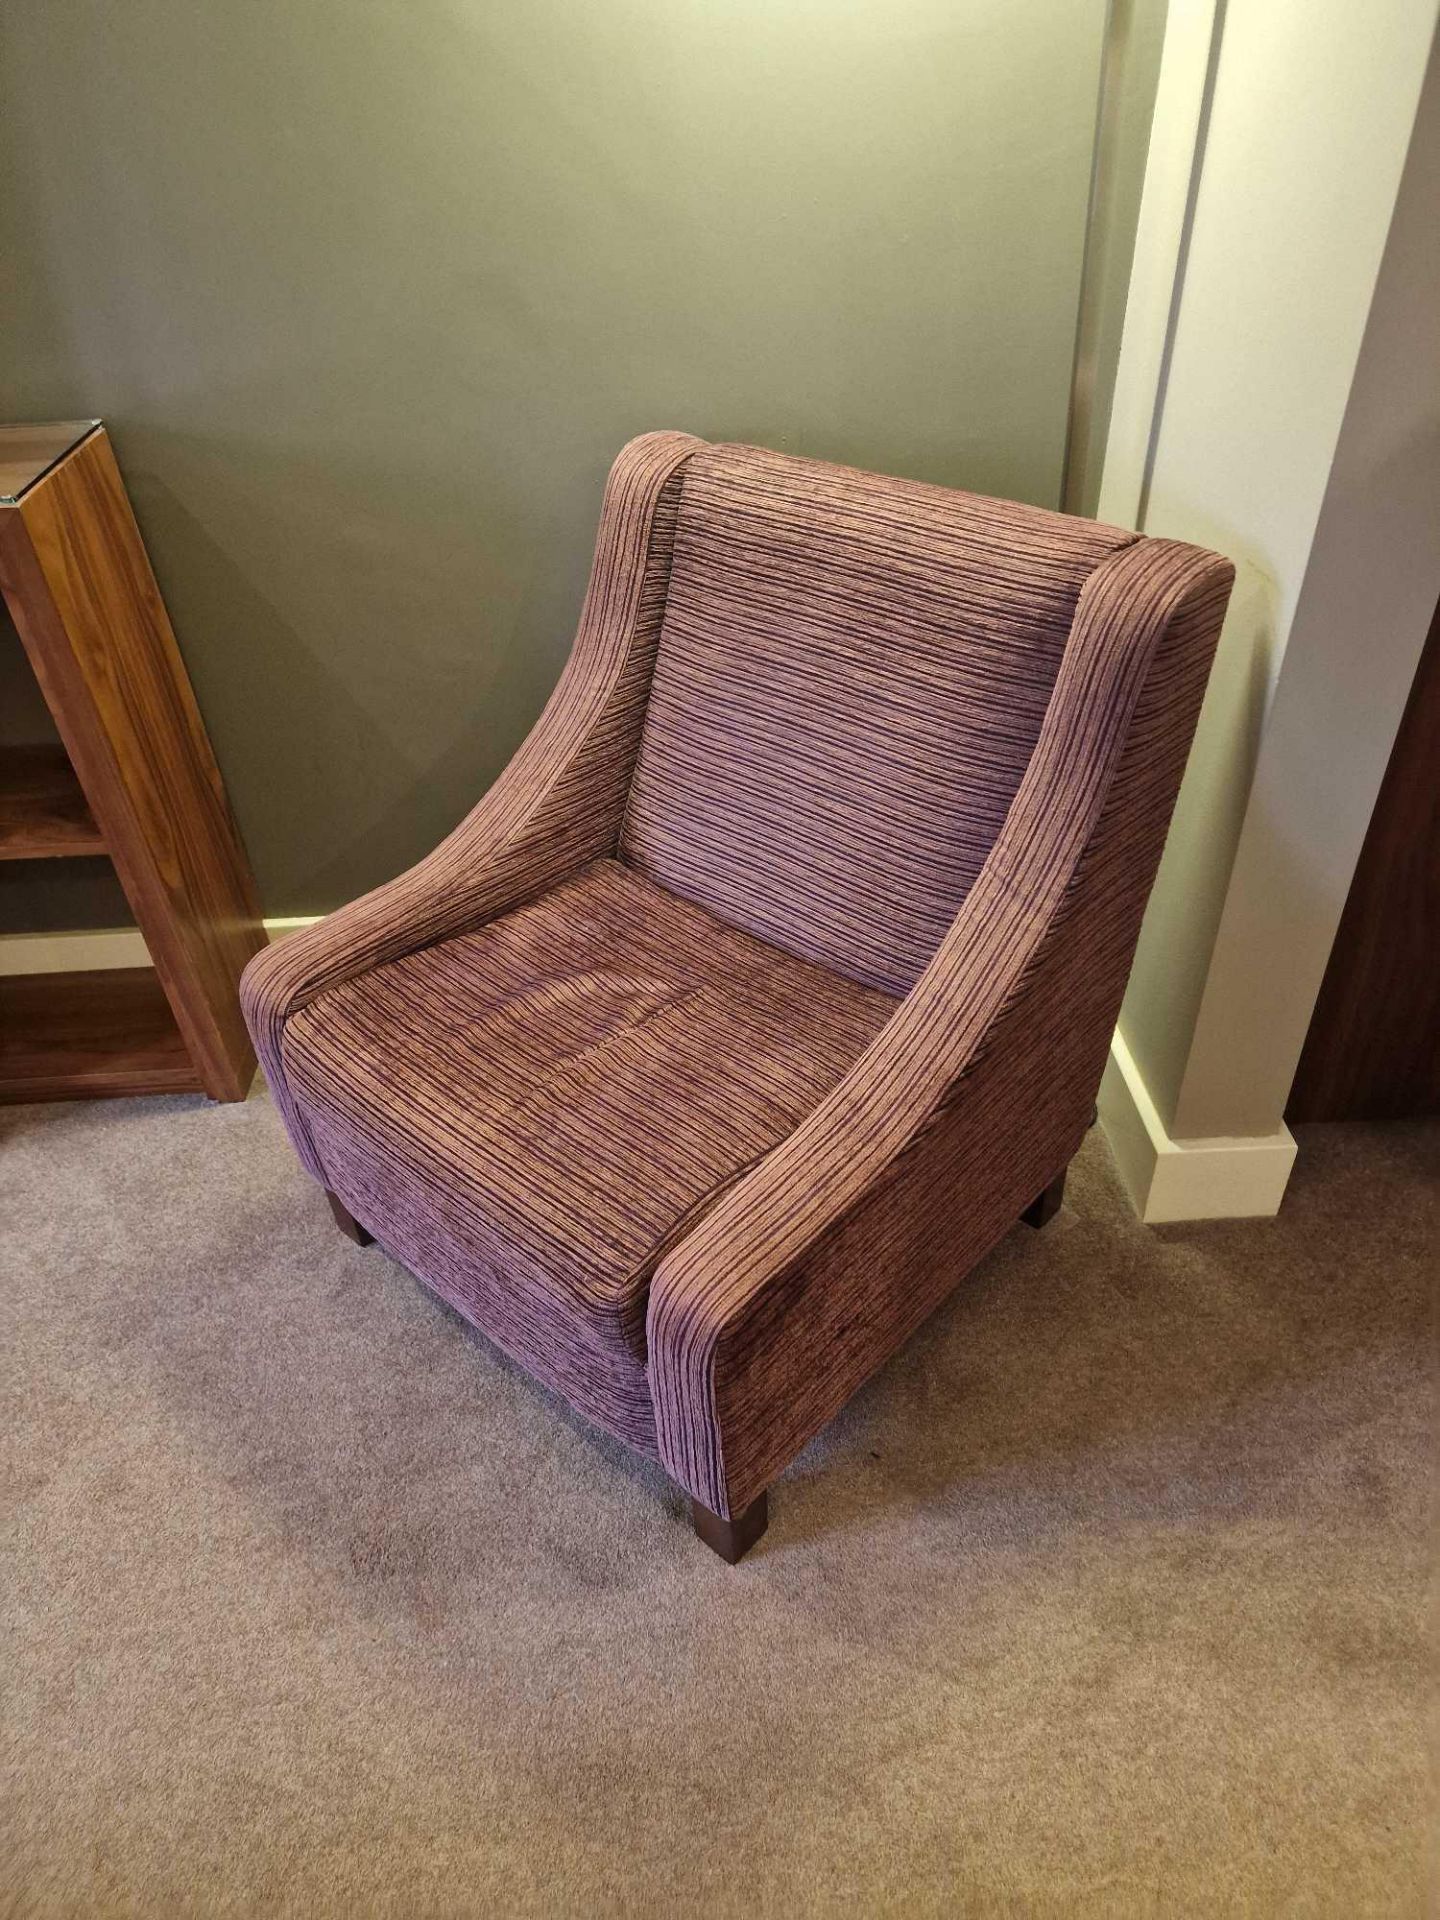 An upholstered relaxer chair 78 x 54 x 86cm ( Location : 10)